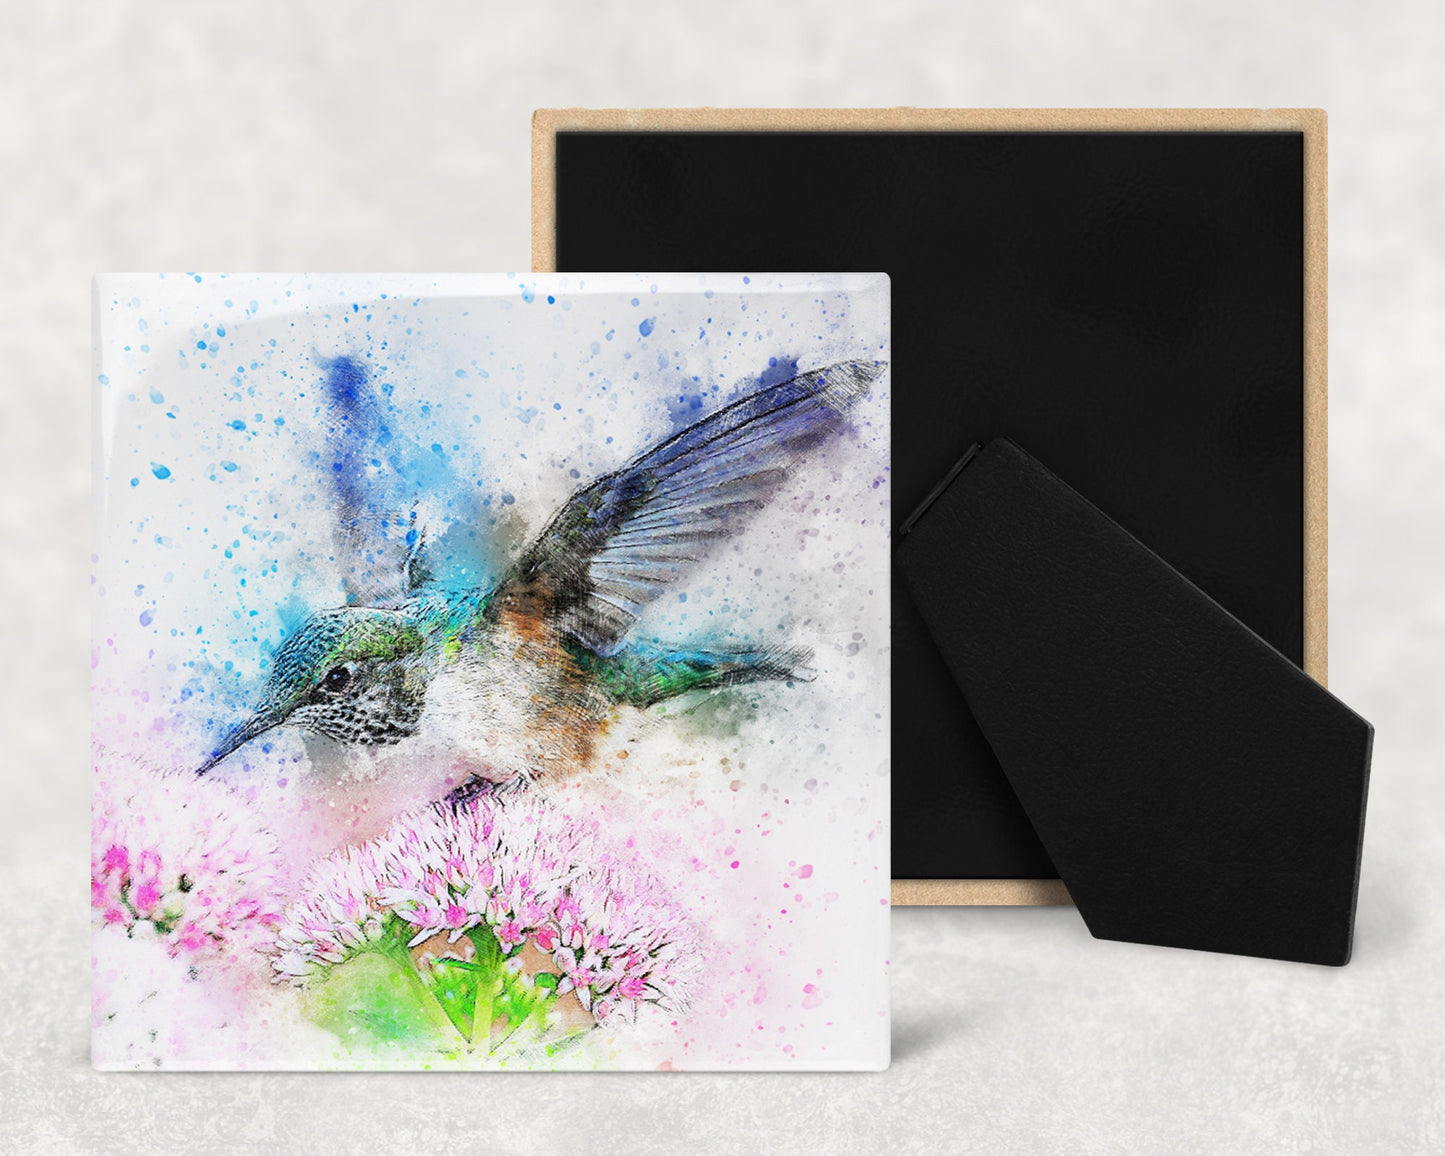 Watercolor Hummingbird Art Decorative Ceramic Tile with Optional Easel Back - Available in 3 Sizes